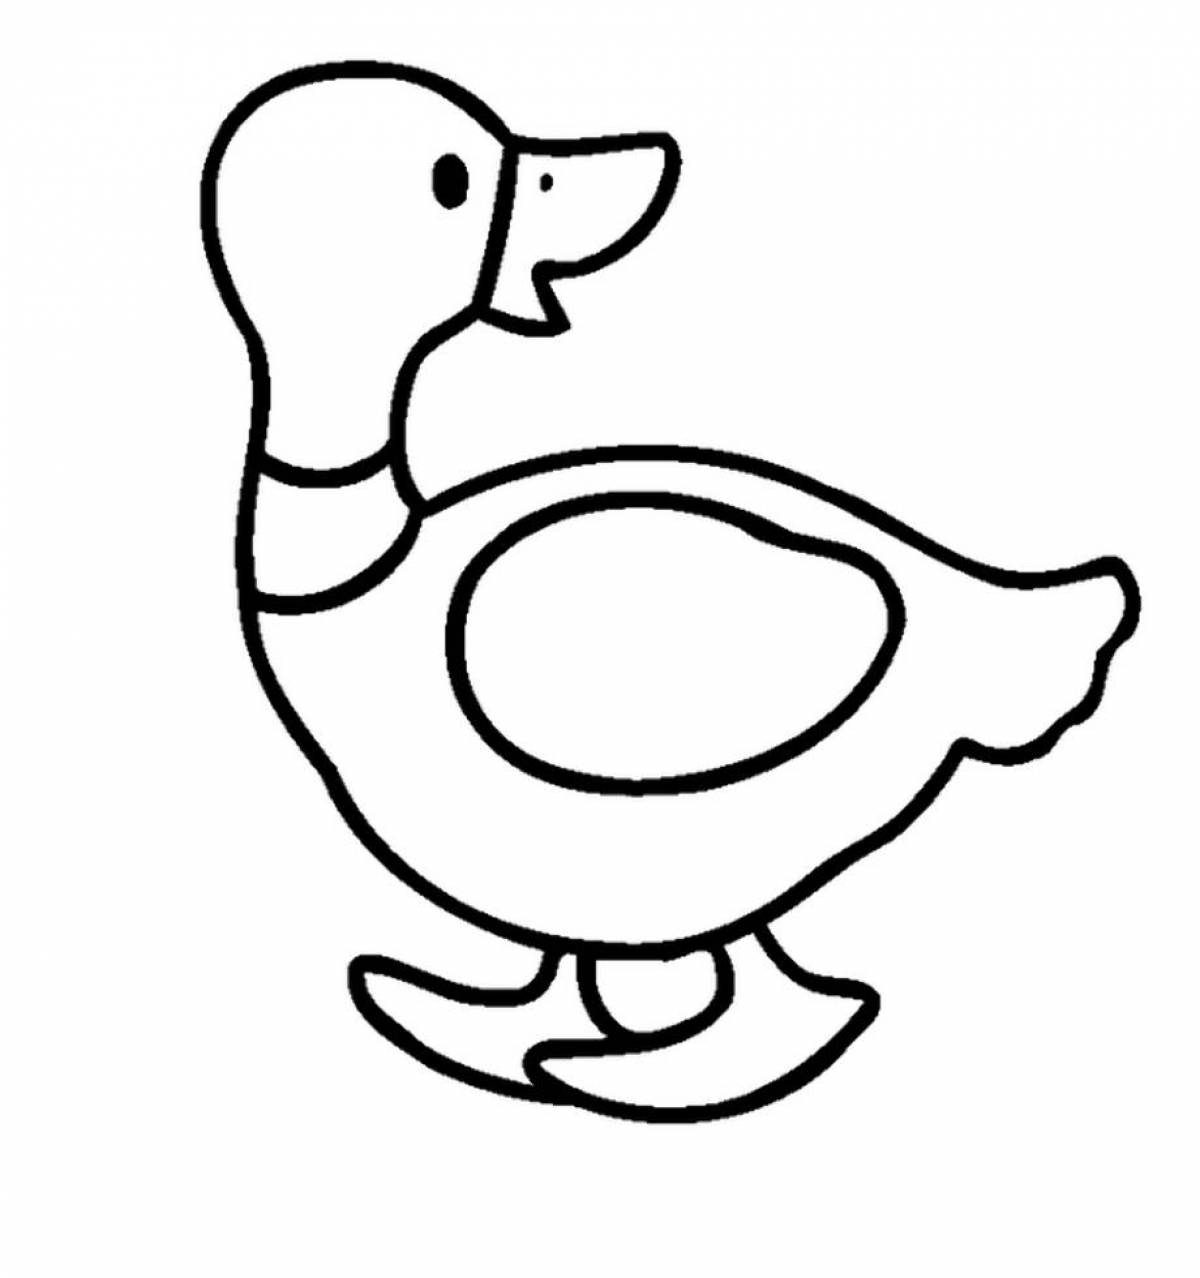 Lalafan colorful duck coloring book for kids